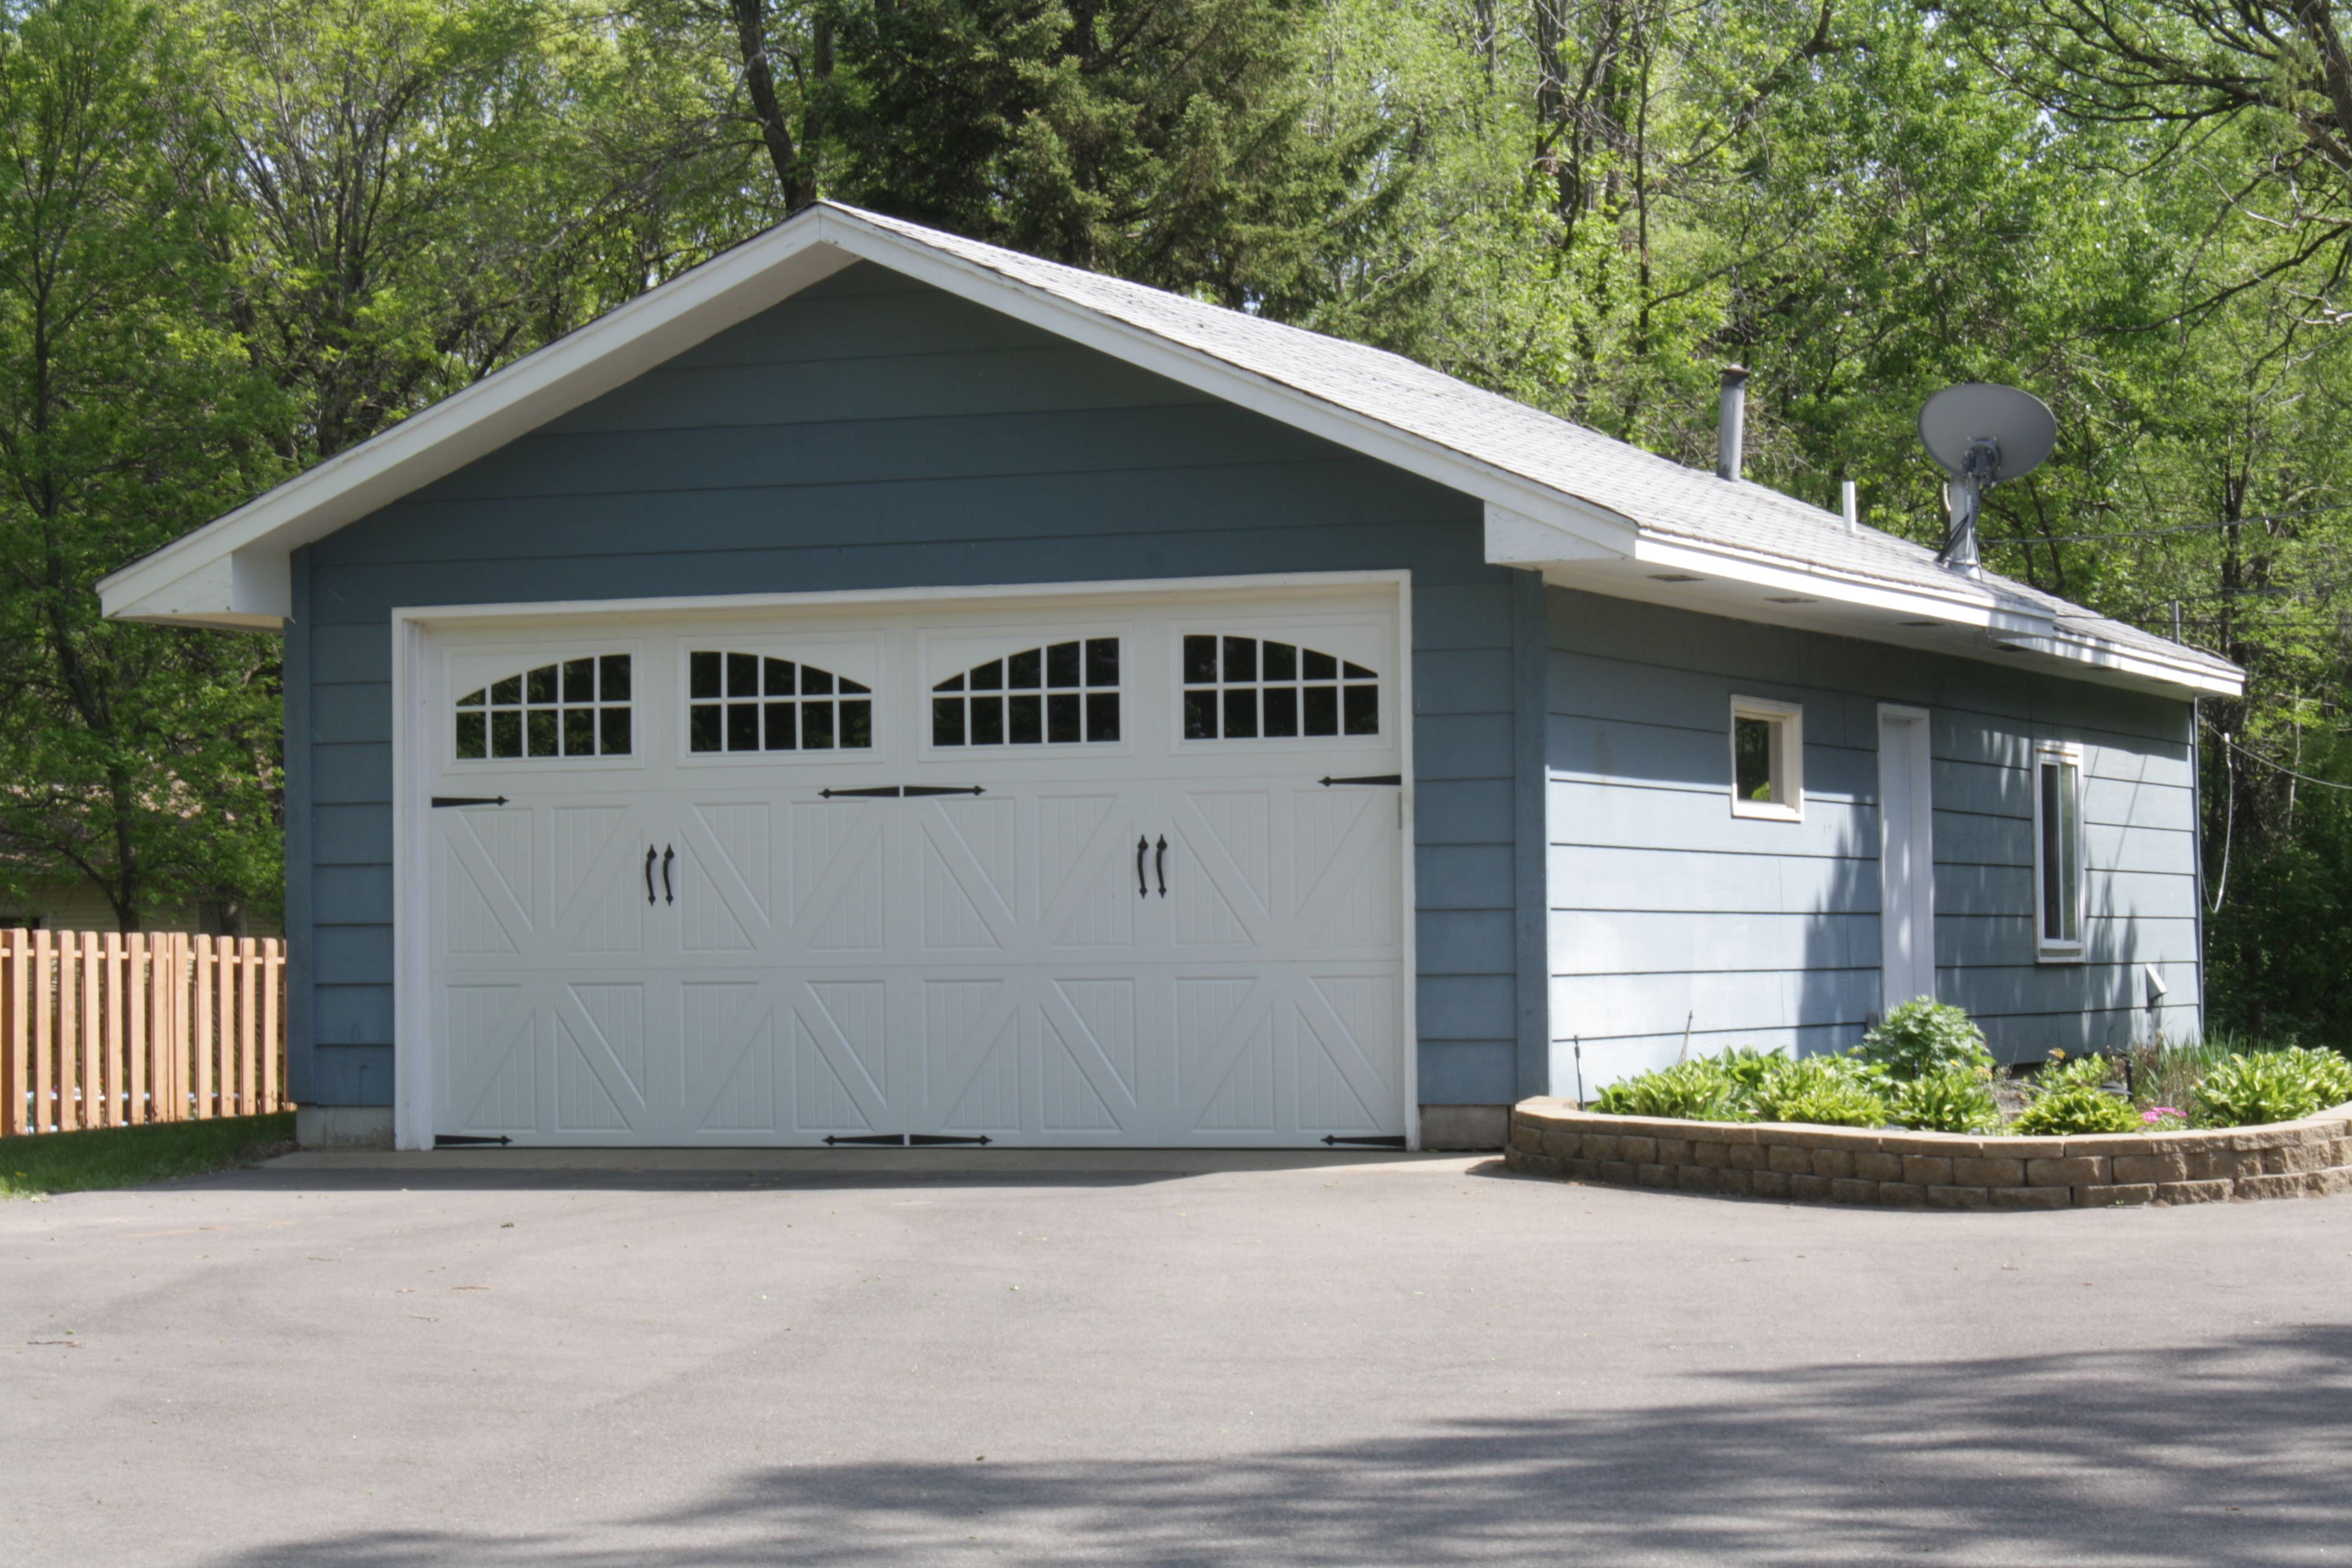 Tuff Shed Reviews Minnesota | outdoor yard storage shed